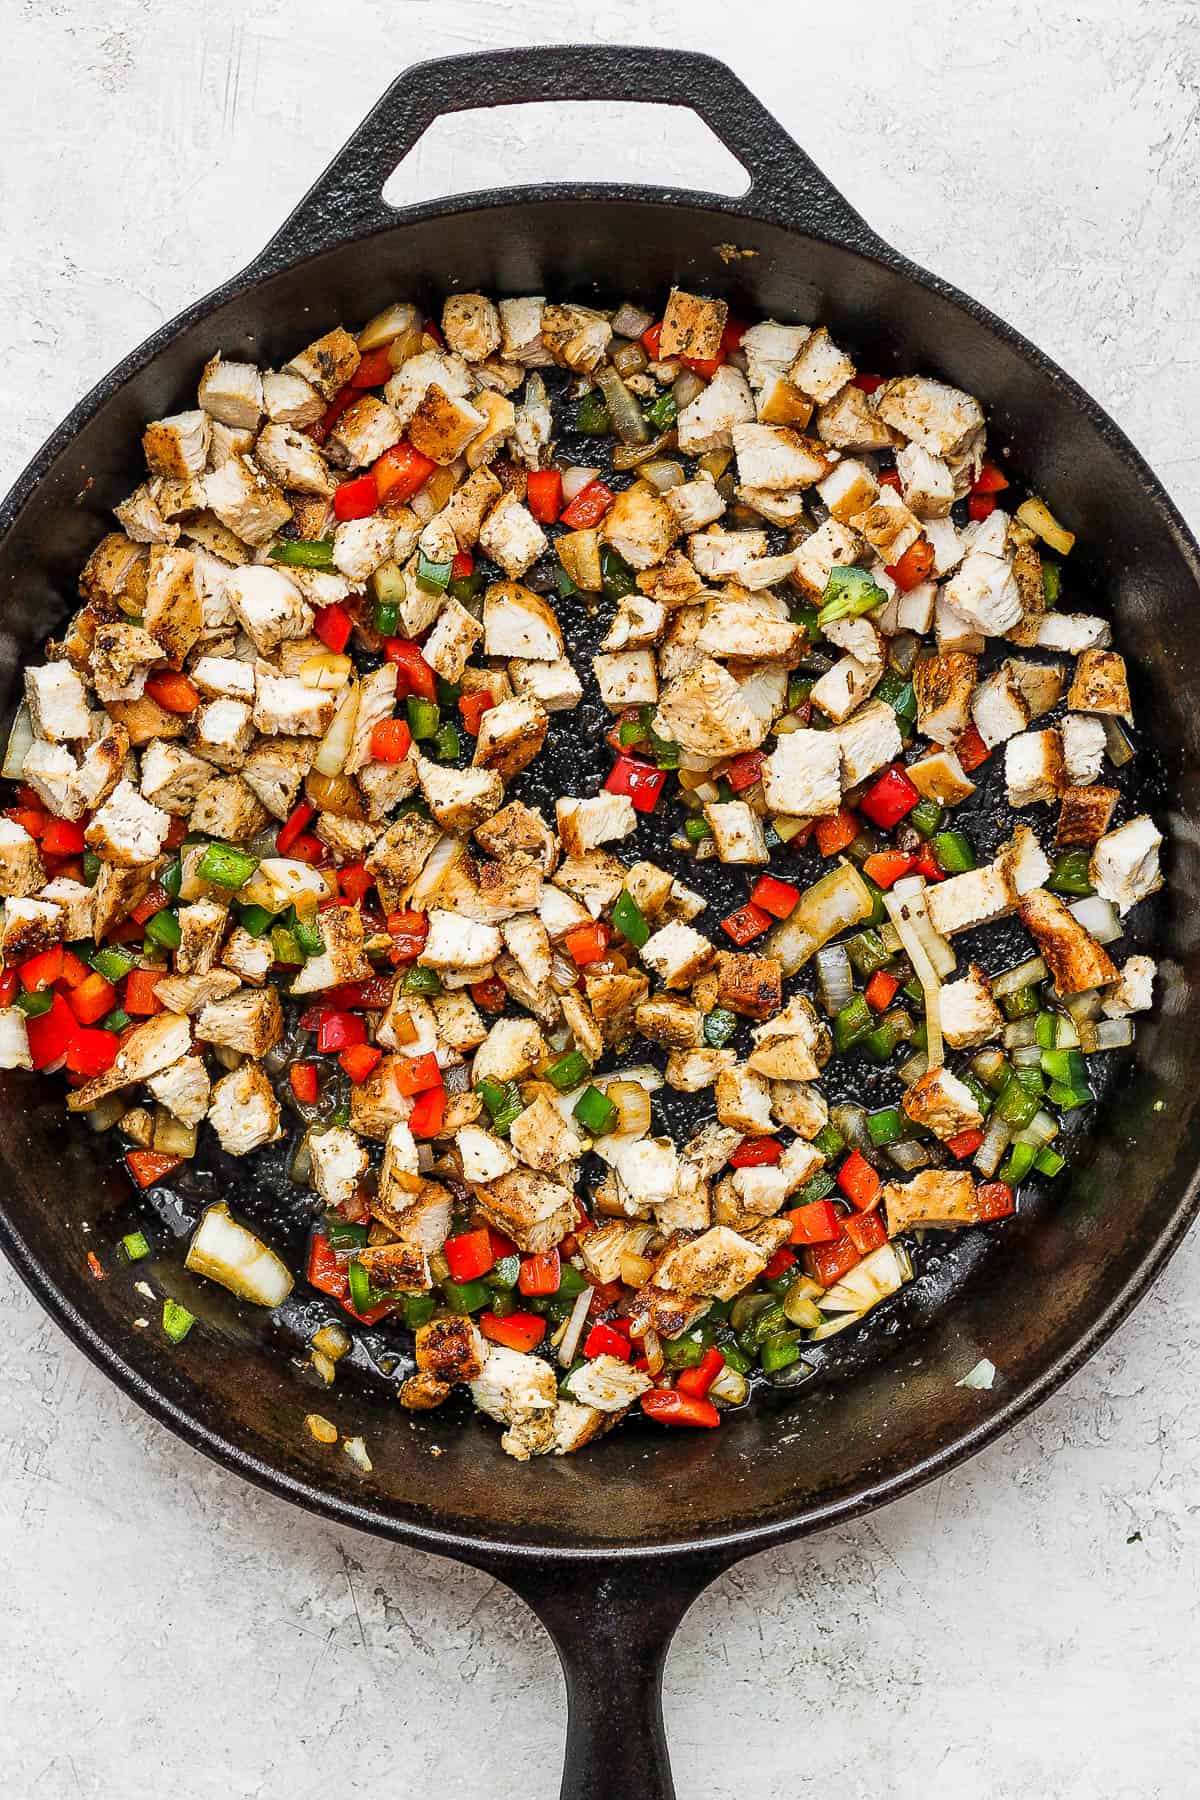 Chopped chicken, peppers, and onions in a skillet for chicken quesadillas.